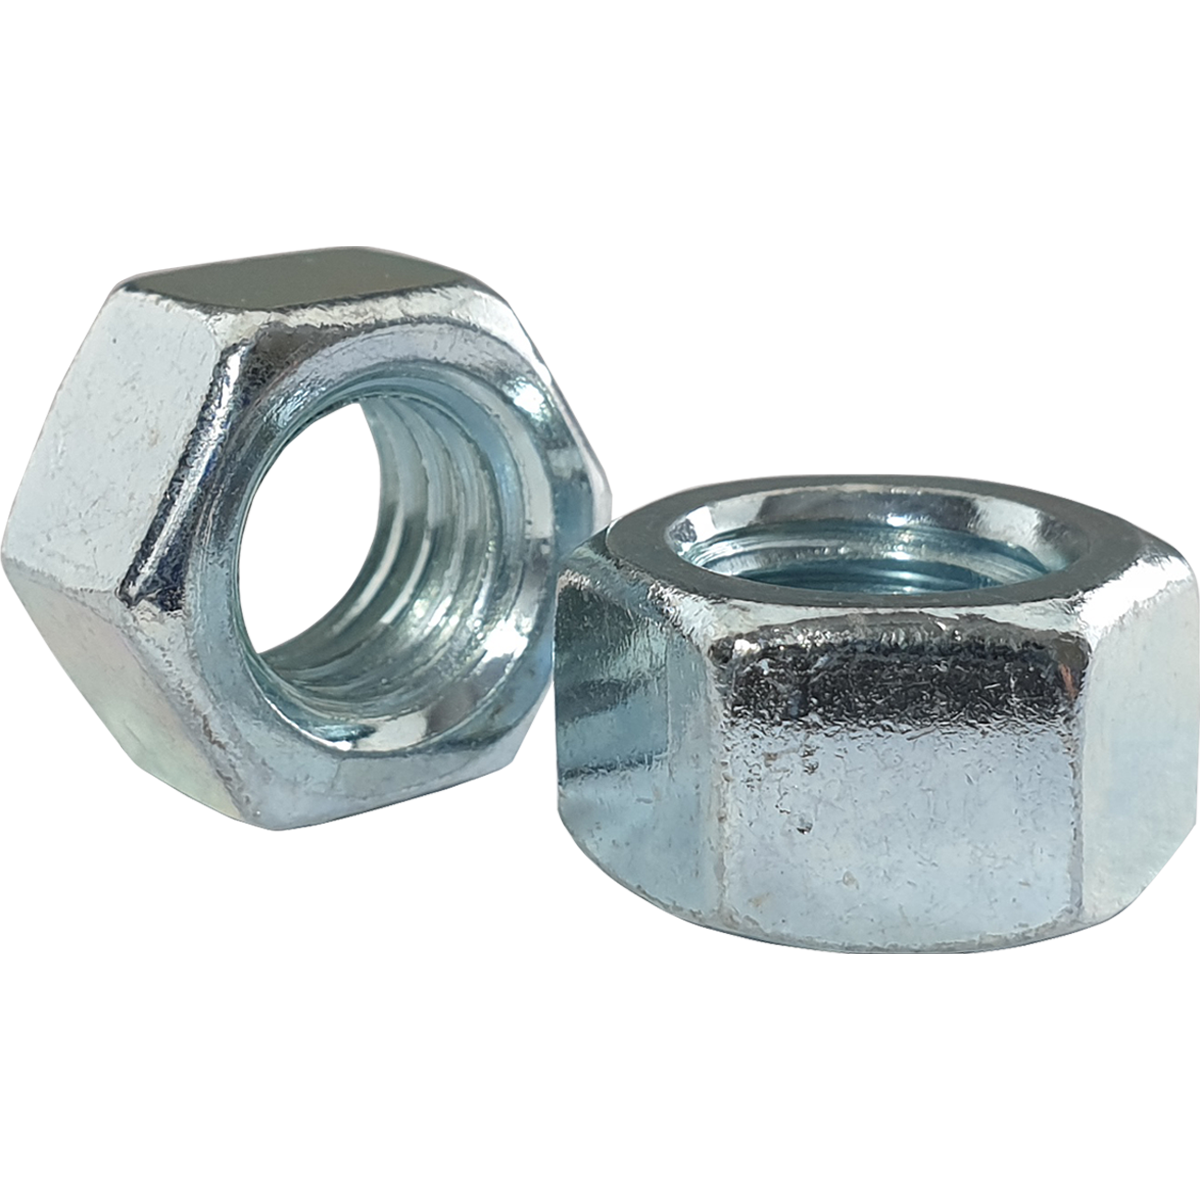 UNC (Imperial Unified Coarse Thread), BZP (Bright Zinc Plated) full nuts, also known as hex full nuts at great prices with Fusion Fixings